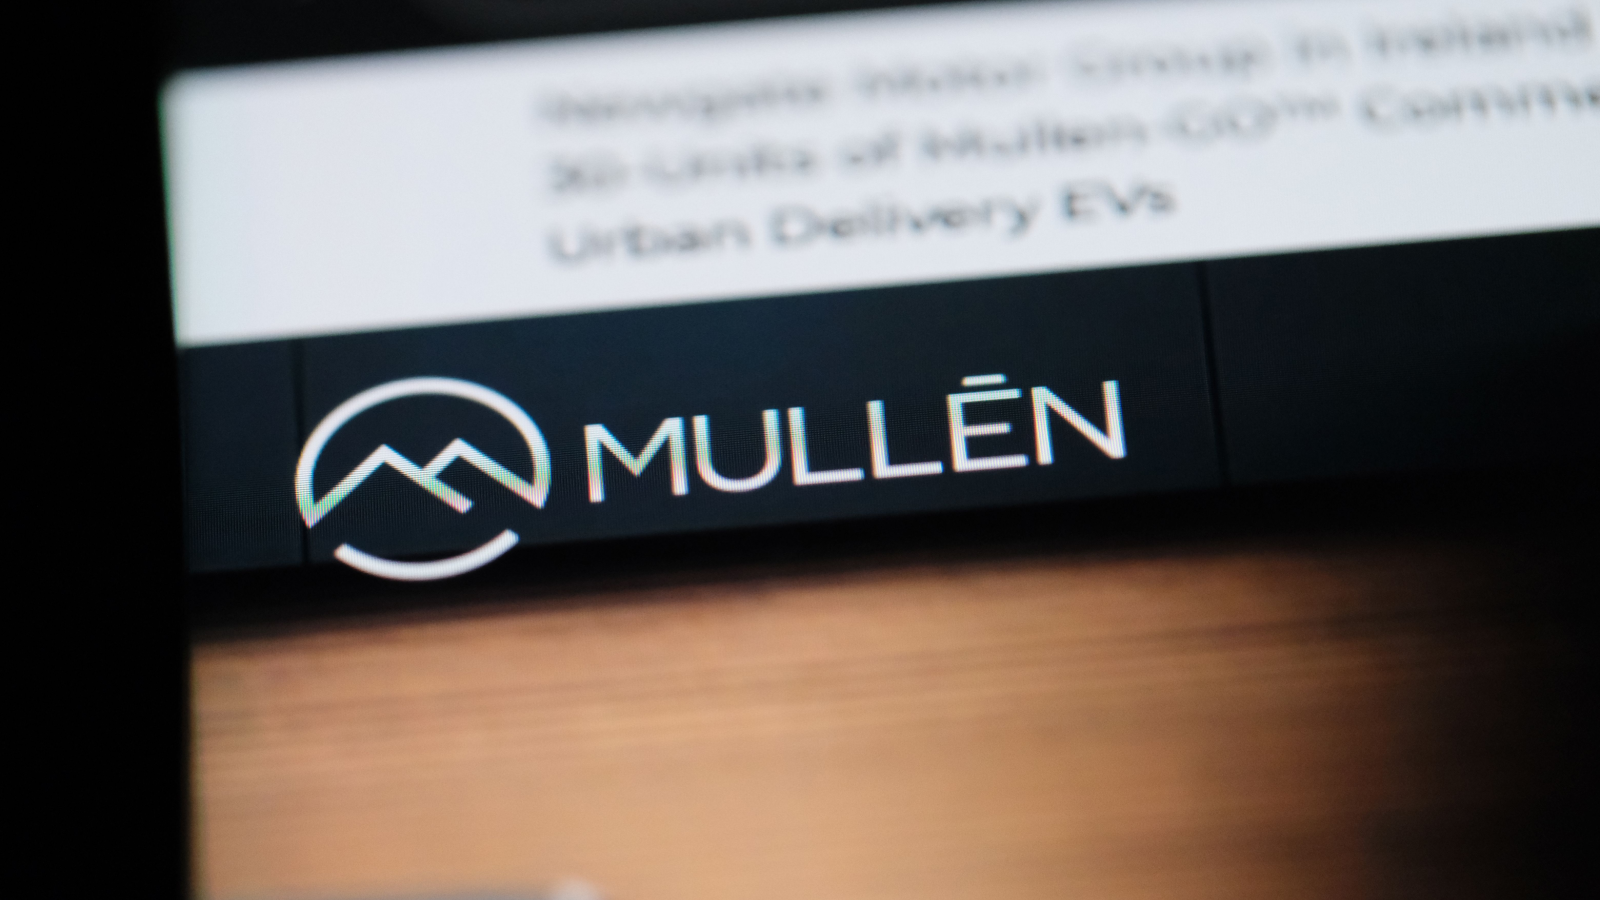 Mullen Automotive (MULN) brand logo. American automotive and electric vehicle manufacturer